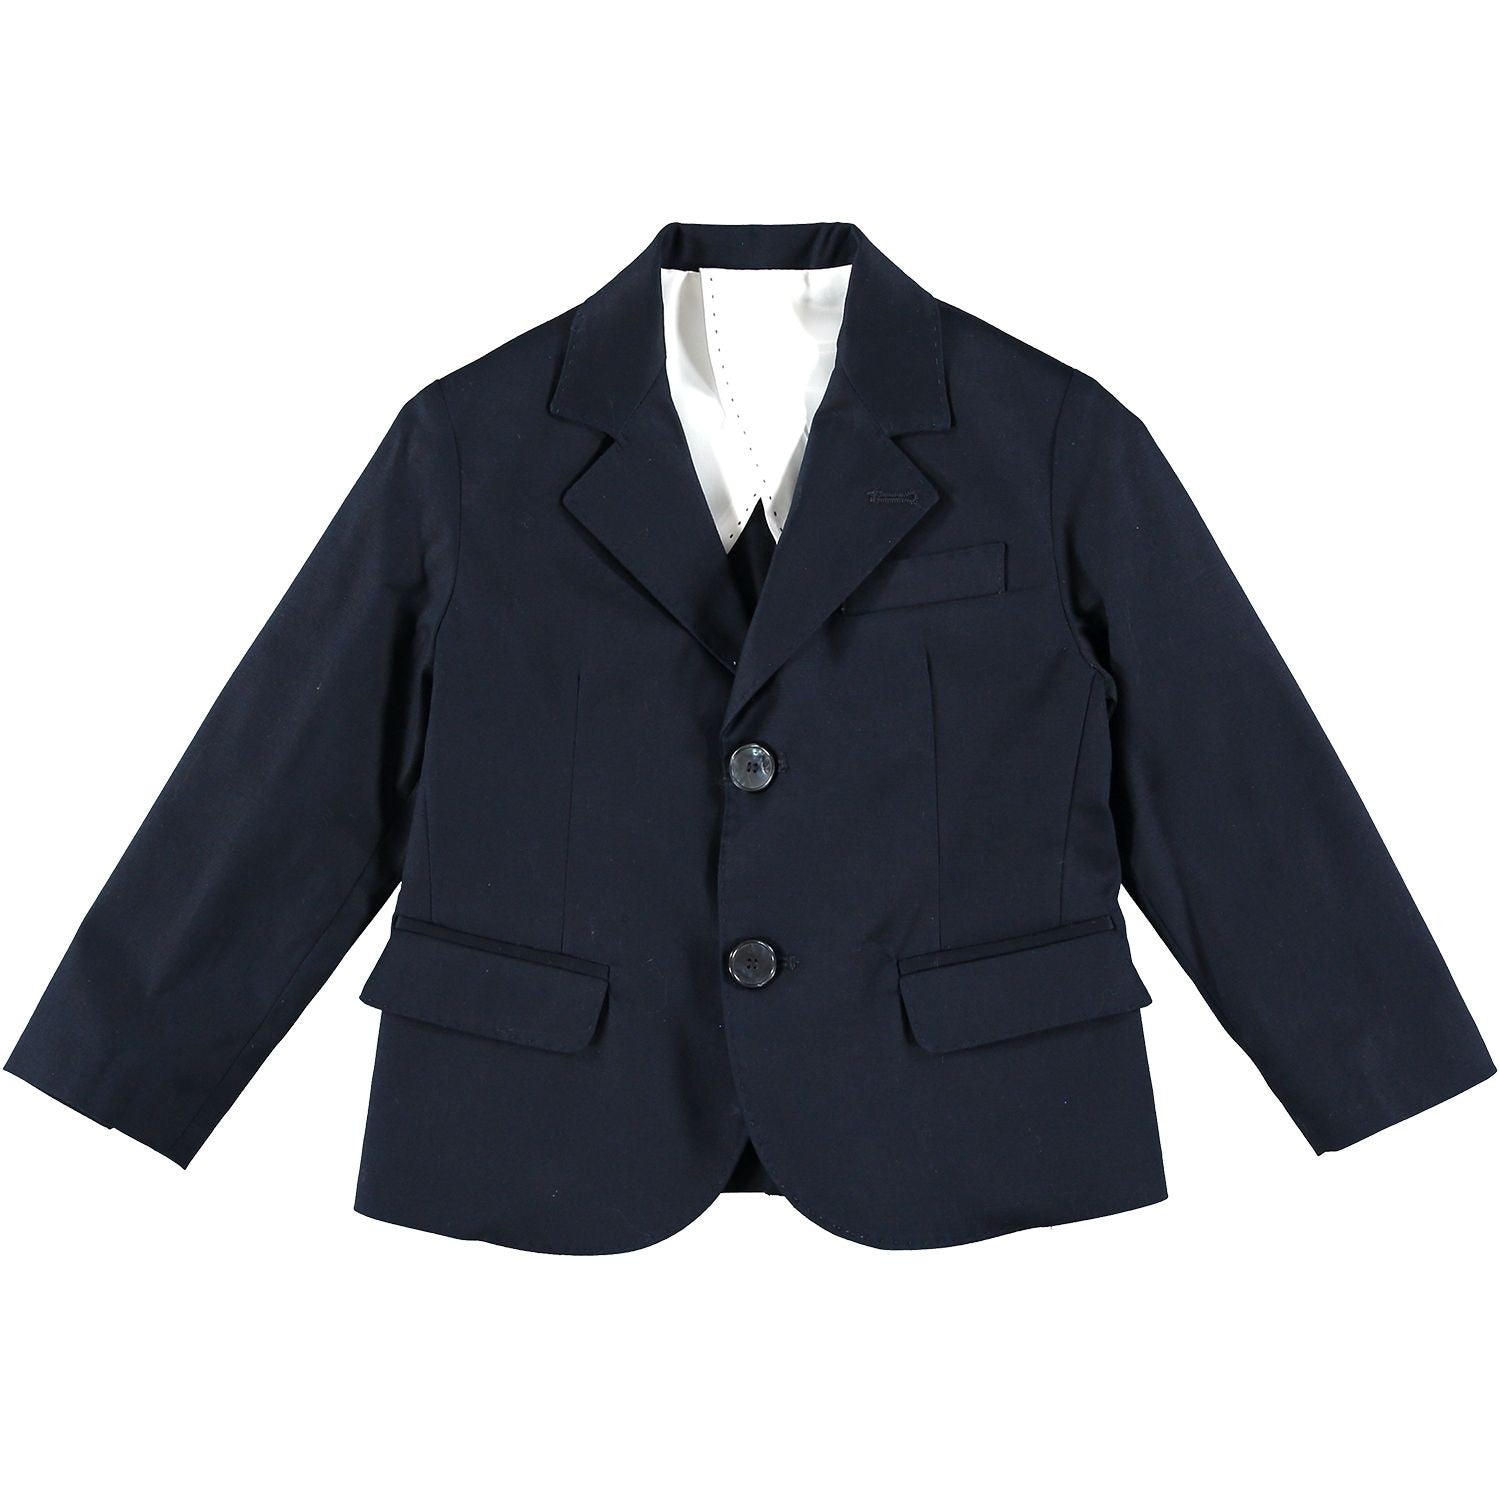 Giacca In Cotone Blu Notte Bambino MANUELL&FRANK MF6025B - MANUELL&FRANK - LuxuryKids